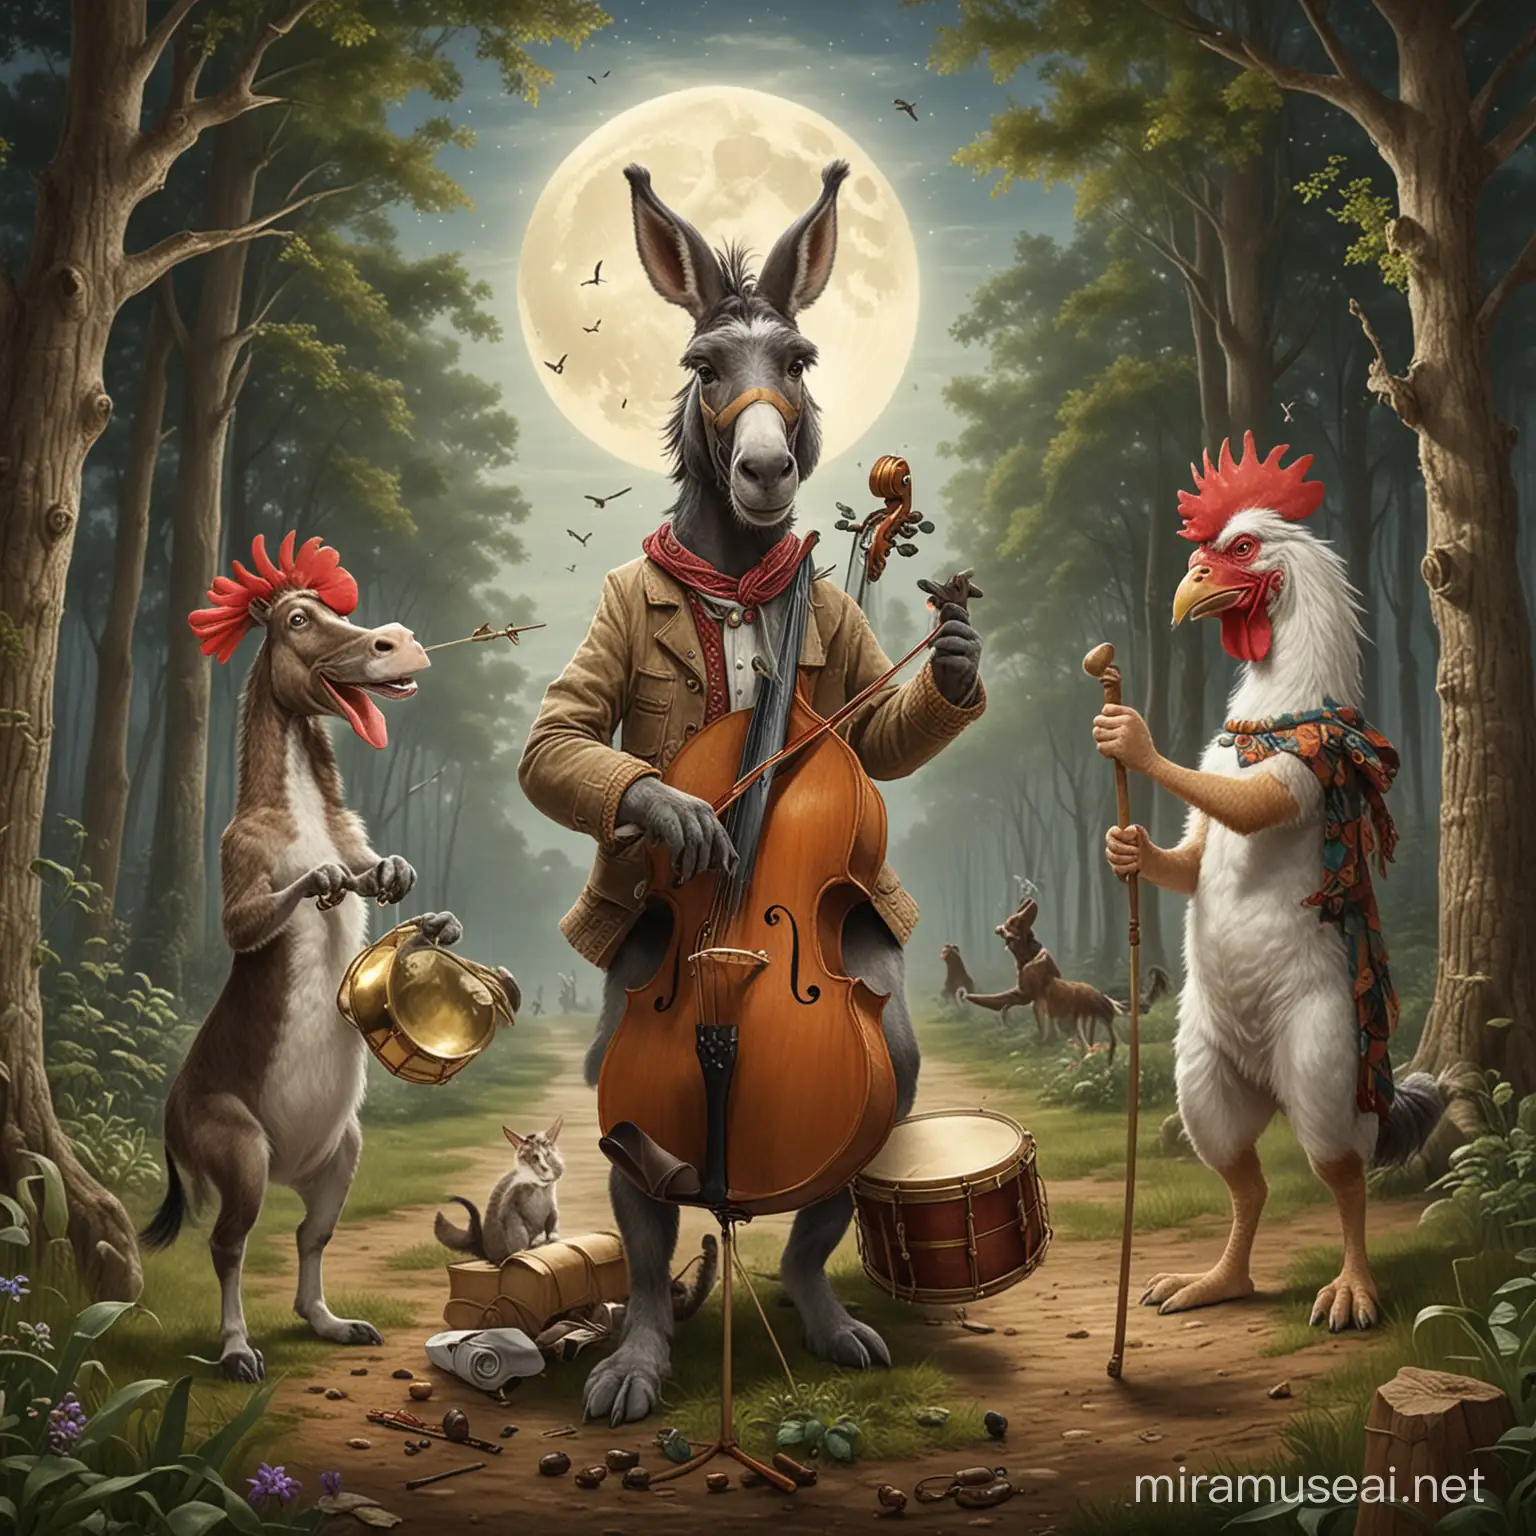 The image should depict a donkey, a dog, a cat, and a rooster standing on top of each other, playing music. The donkey should be playing the flute, the dog should be playing the drums, the cat should be playing the violin, and the rooster should be playing the trumpet. The animals should be standing in a forest clearing, and there should be a full moon in the background.